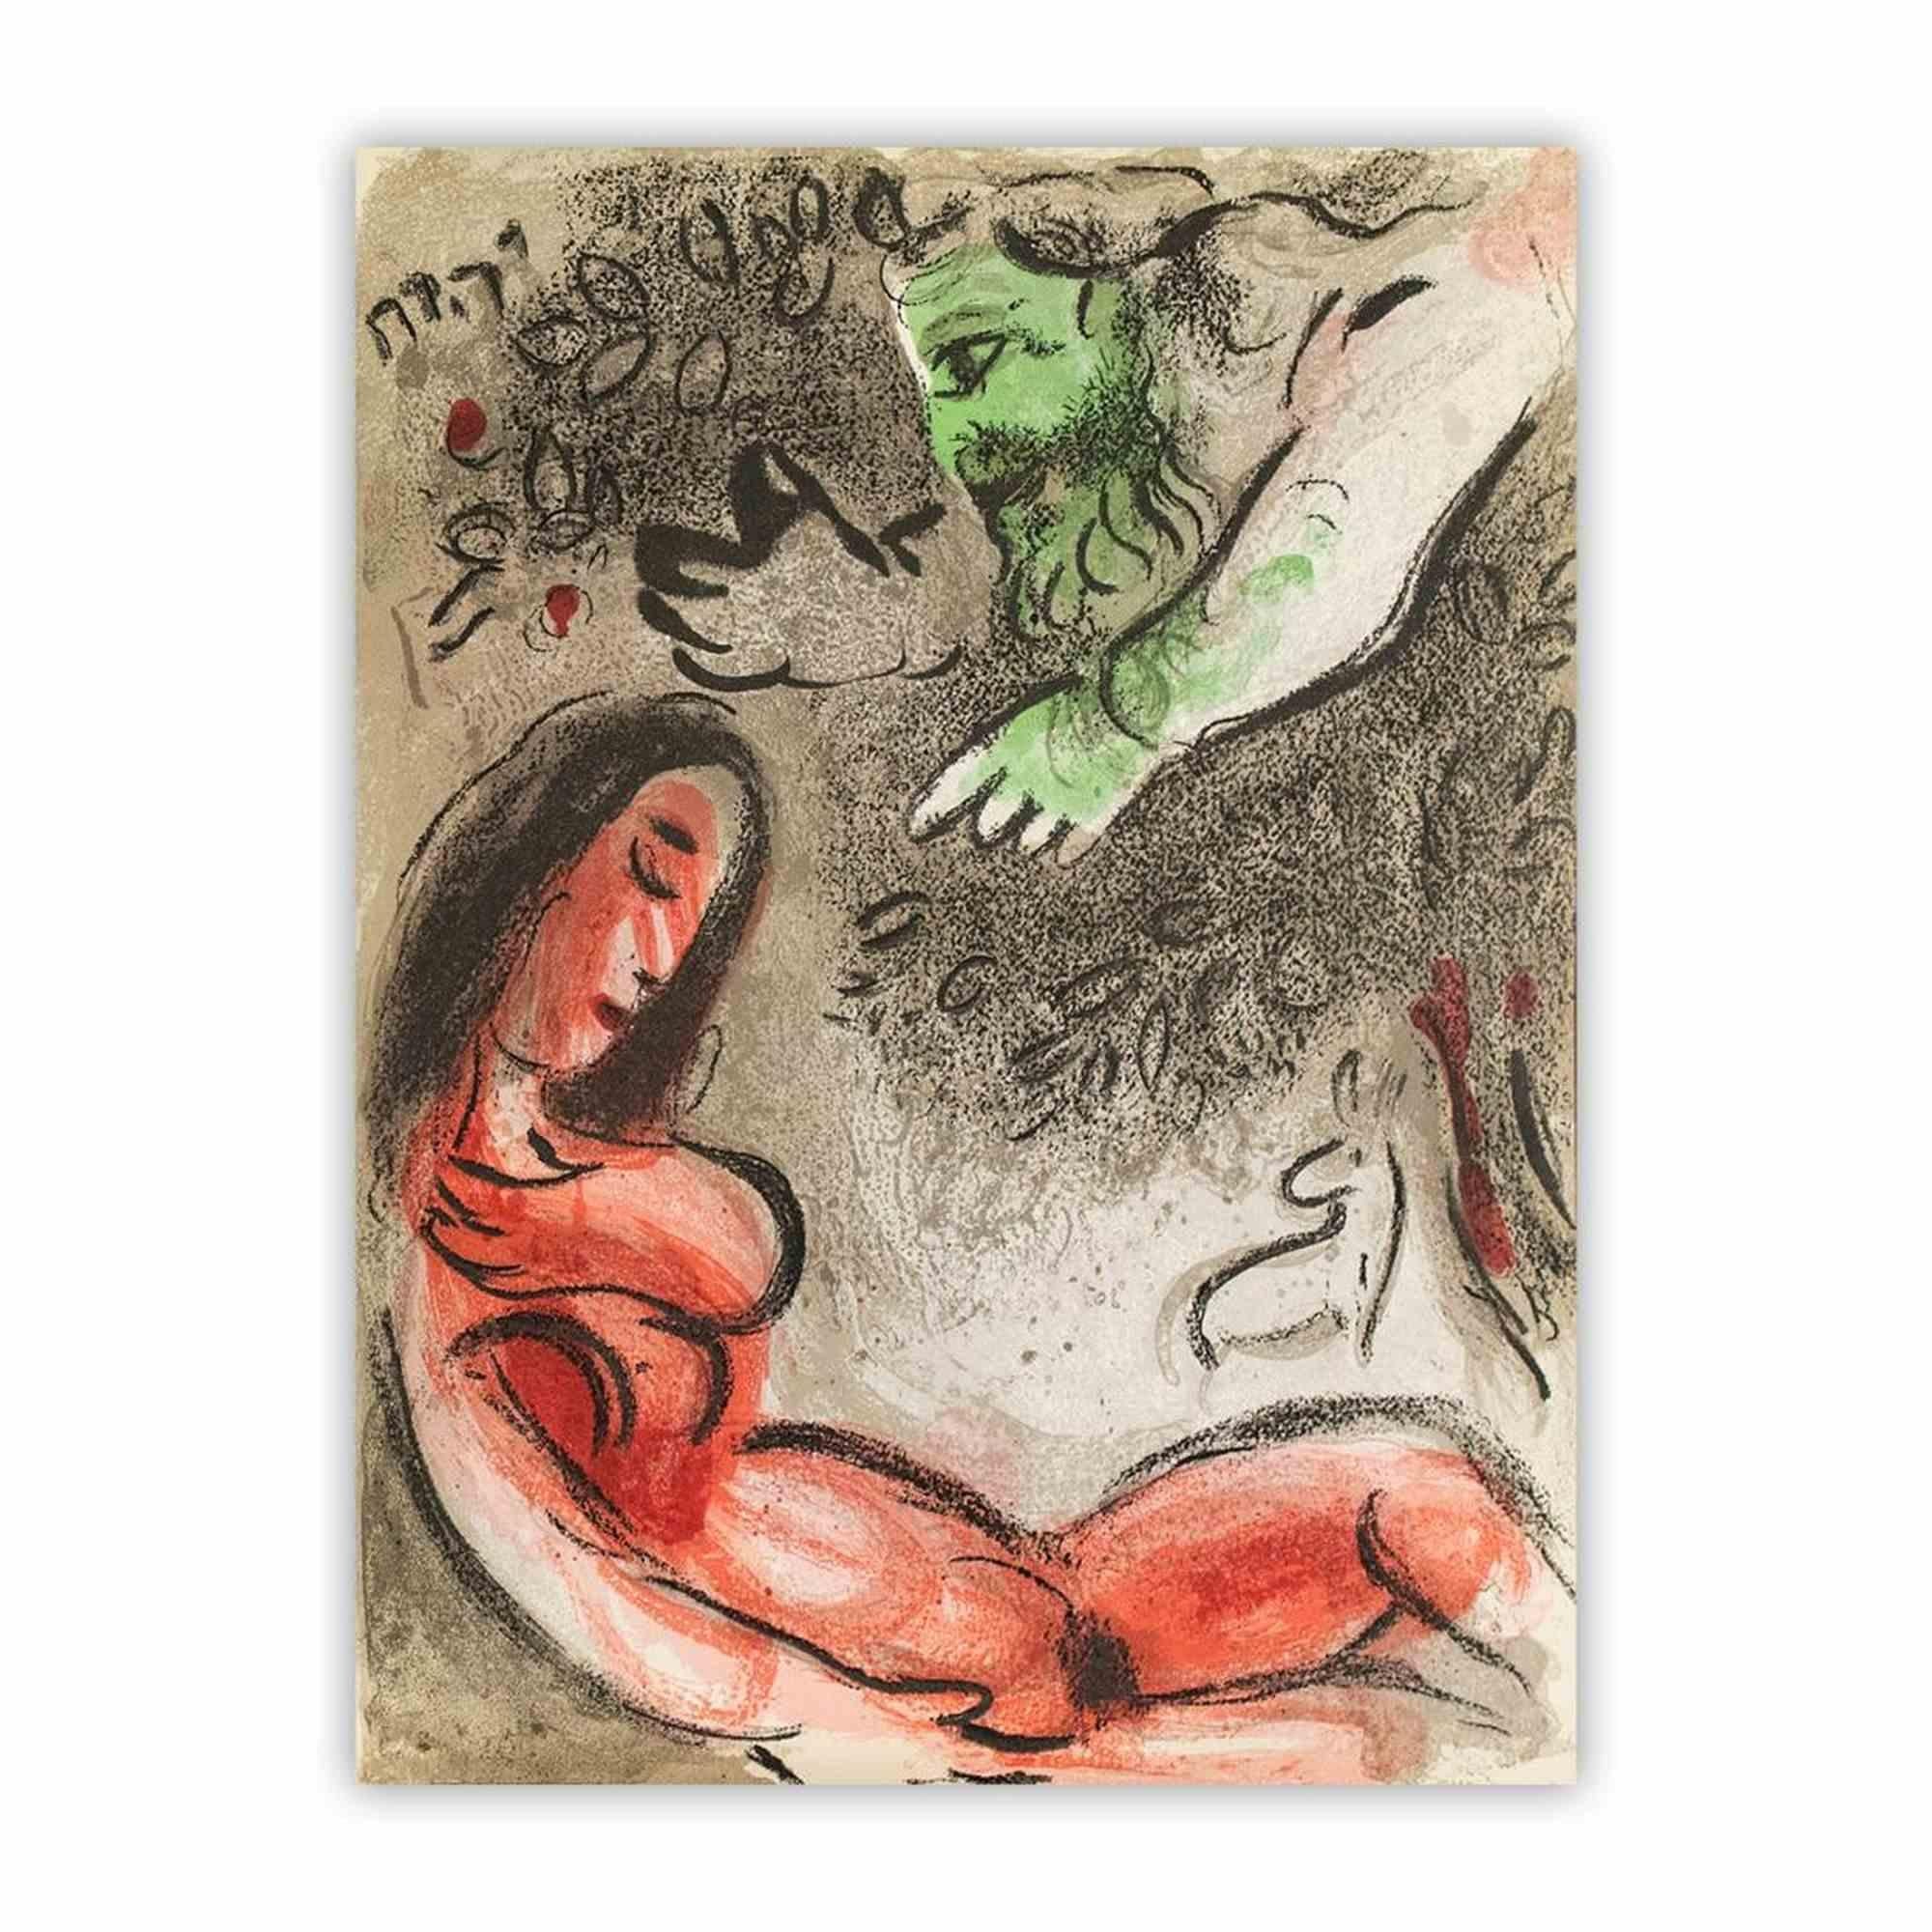 Eve Cursed by God - Lithograph by Marc Chagall - 1960